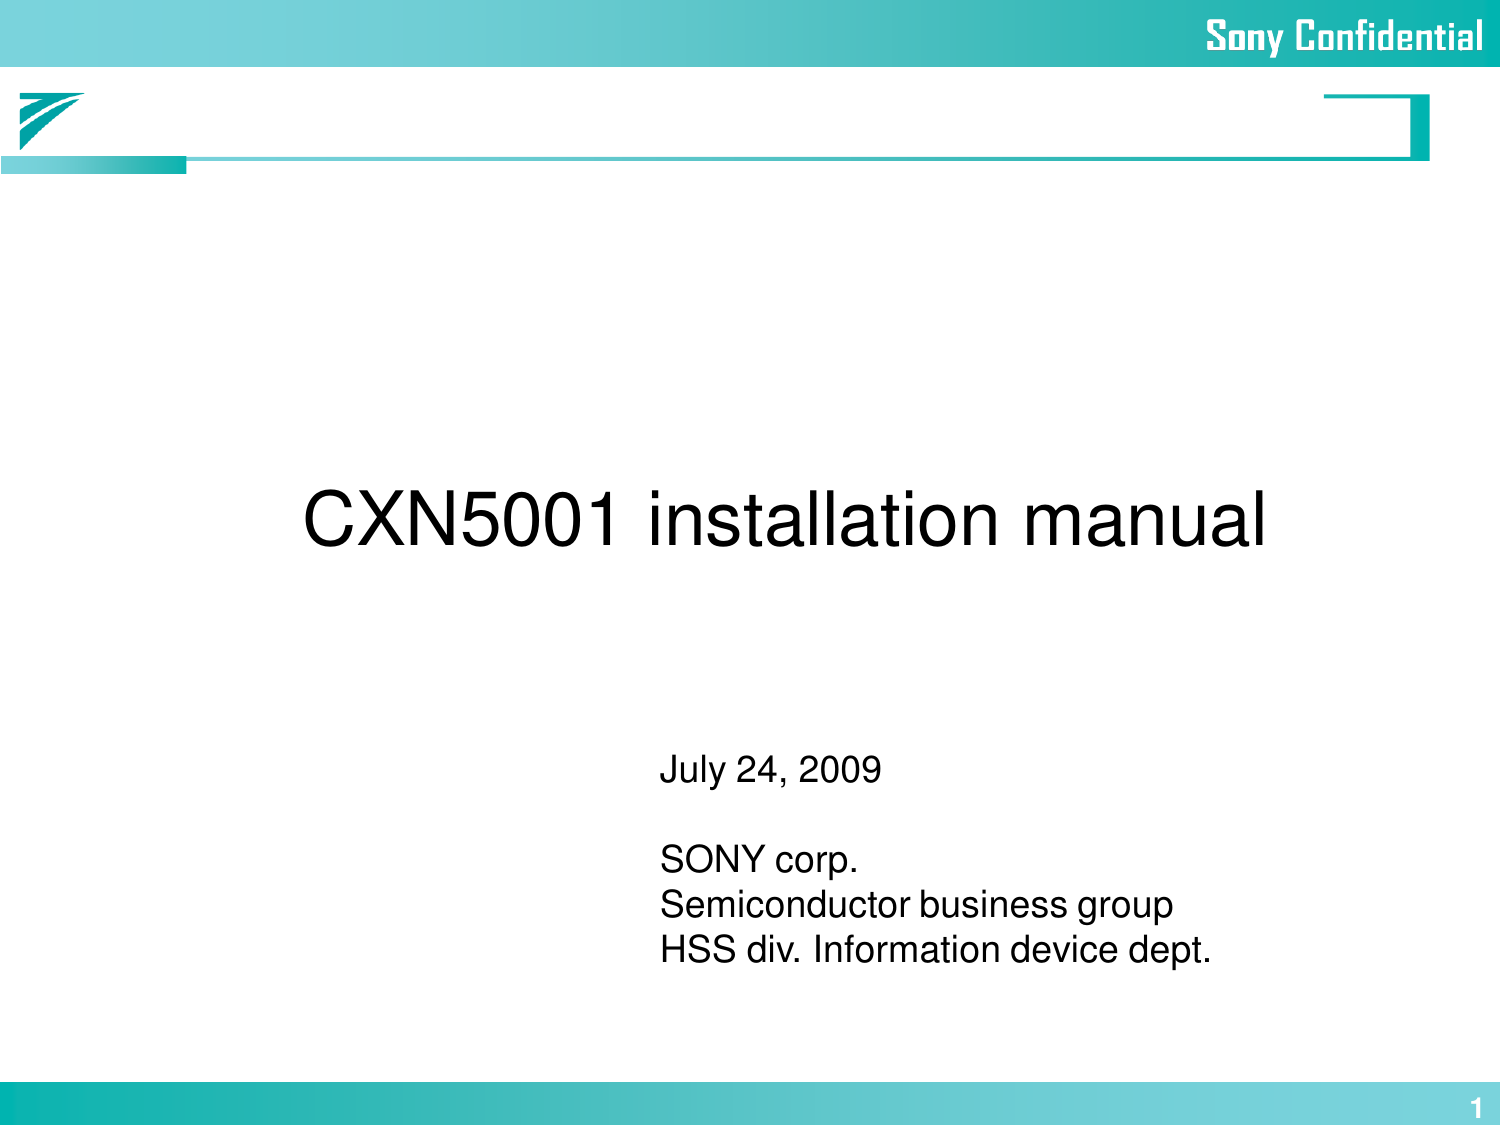 1CXN5001 installation manualJuly 24, 2009SONY corp.Semiconductor business groupHSS div. Information device dept.